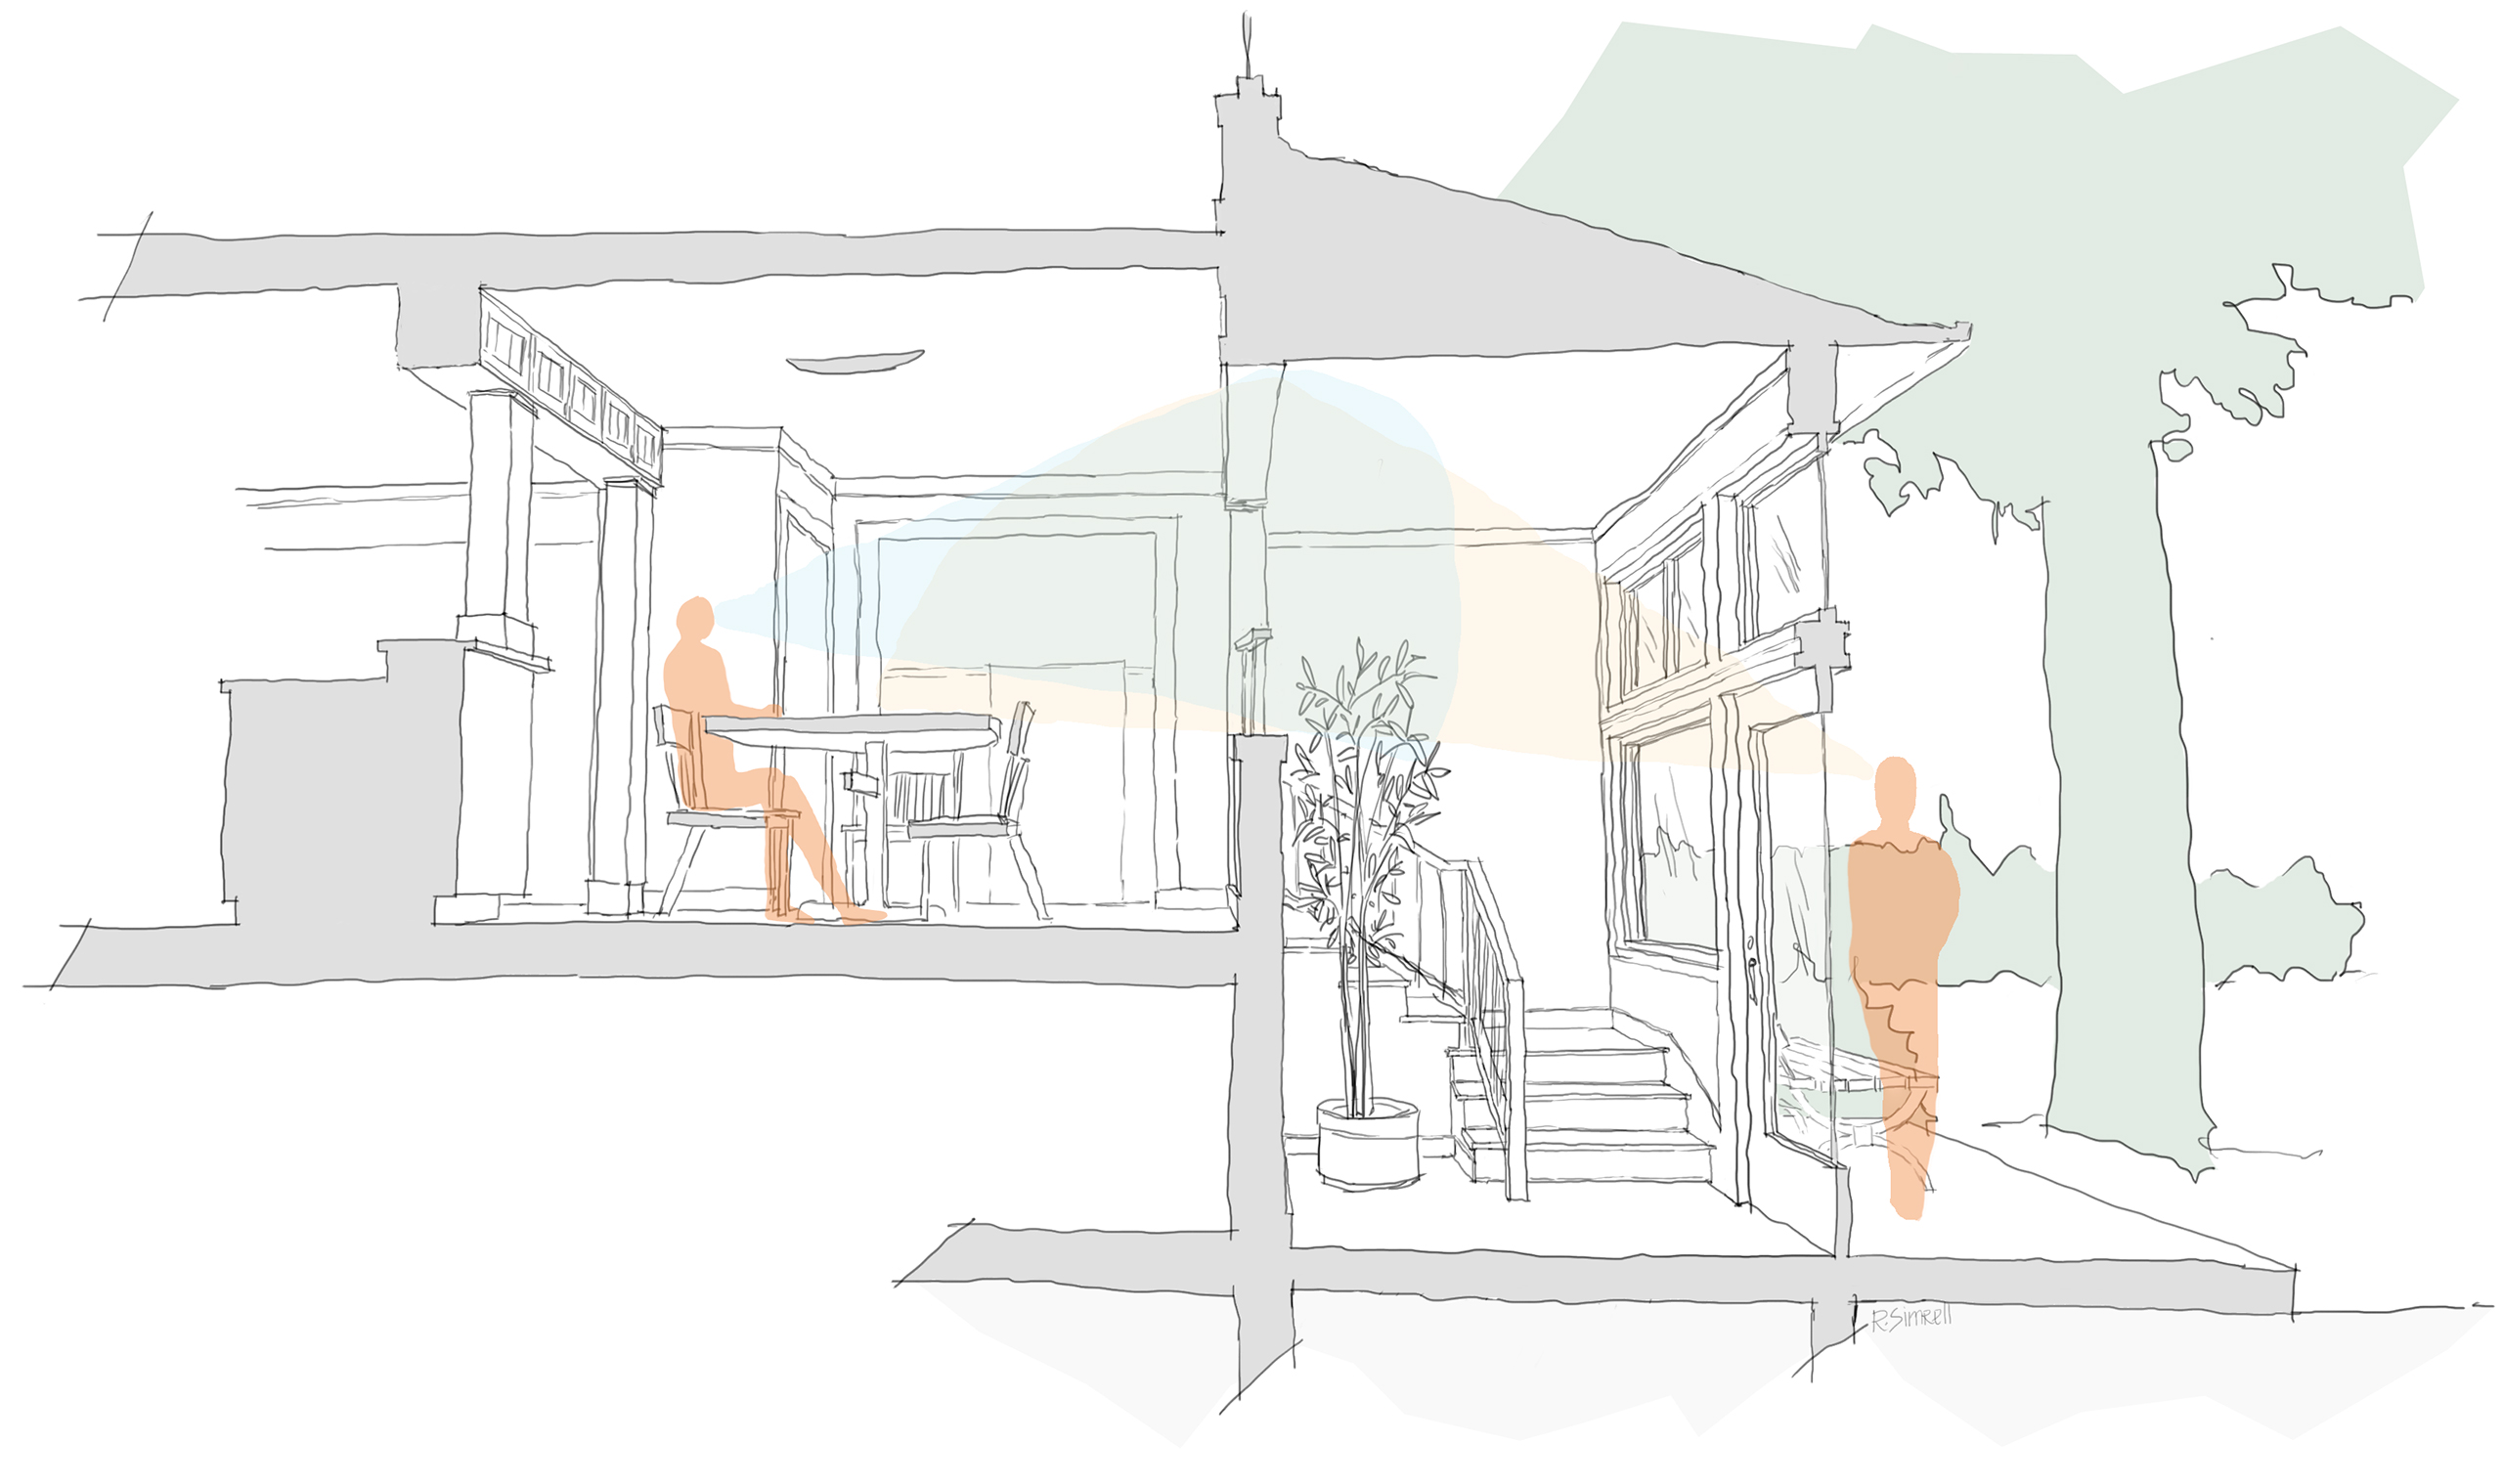 92nd Street Remodel & Addition: Early Design Sketches - Sectional Perspective: View Overlays